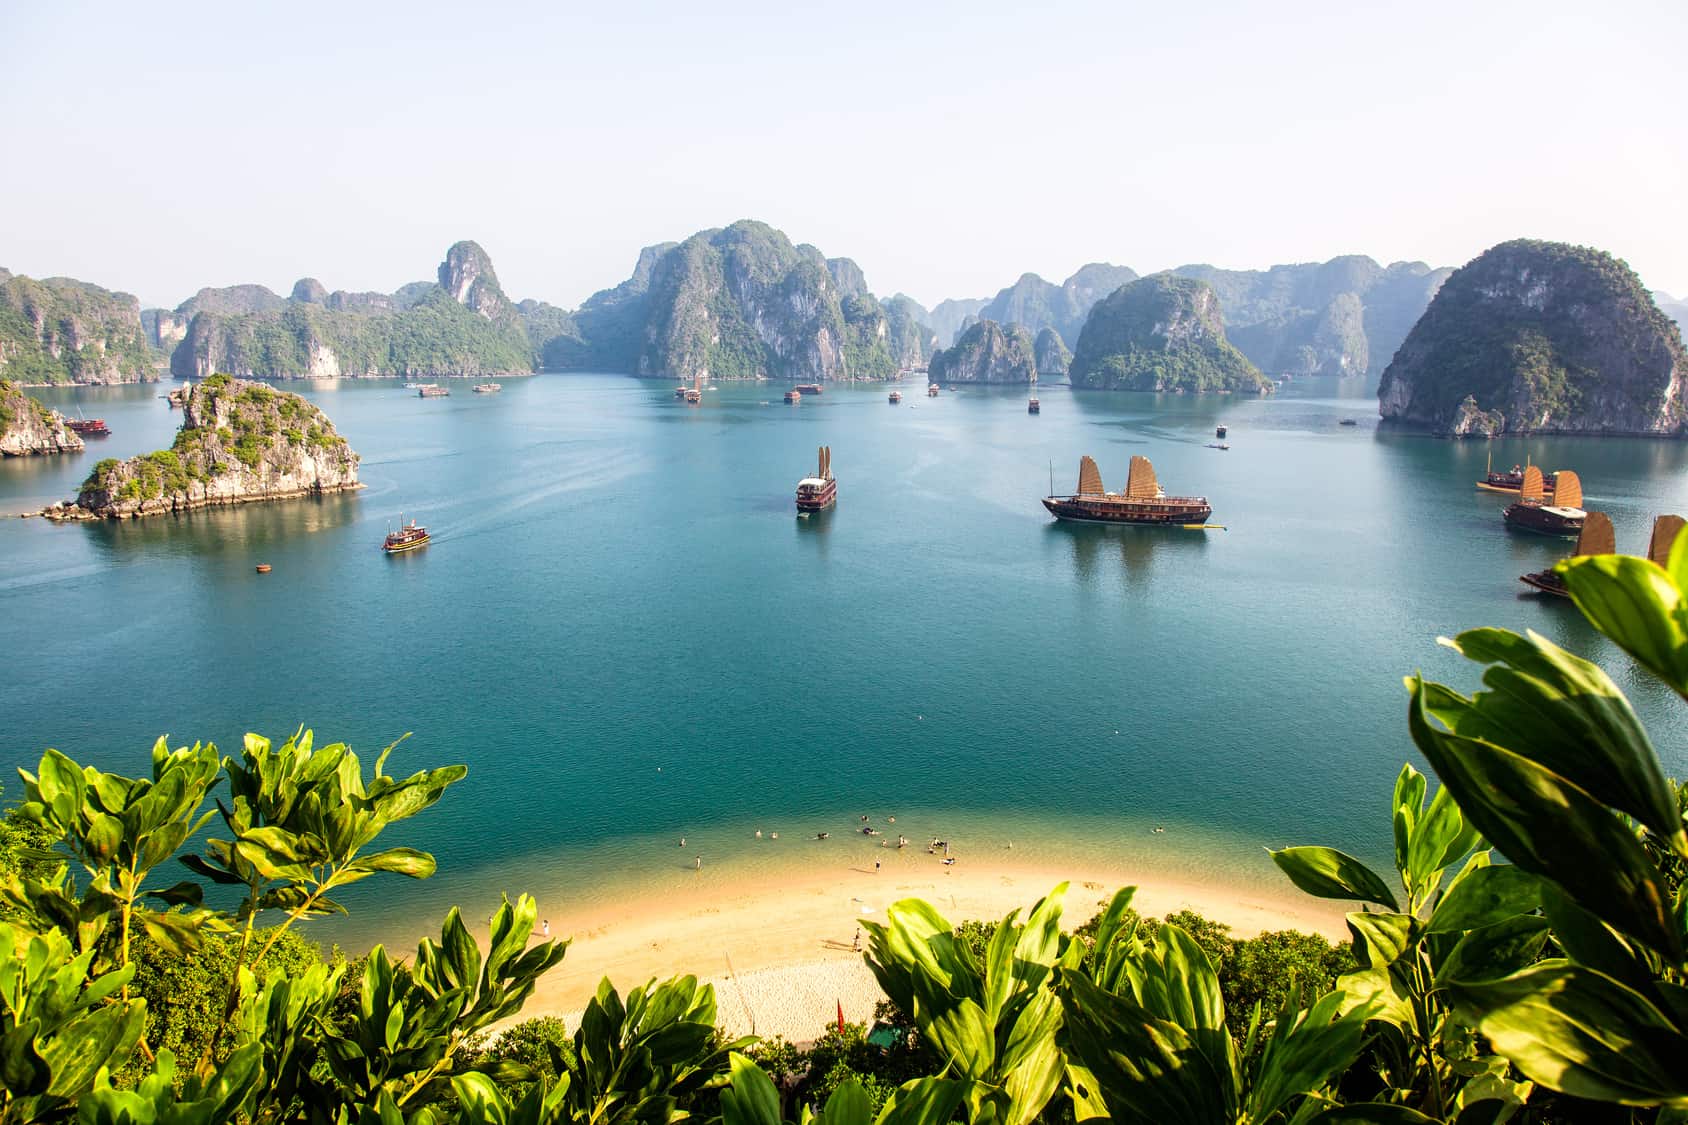 Take a journey to the stunning Halong Bay and discover breathtaking landscapes, cultural wonders, and unforgettable experiences